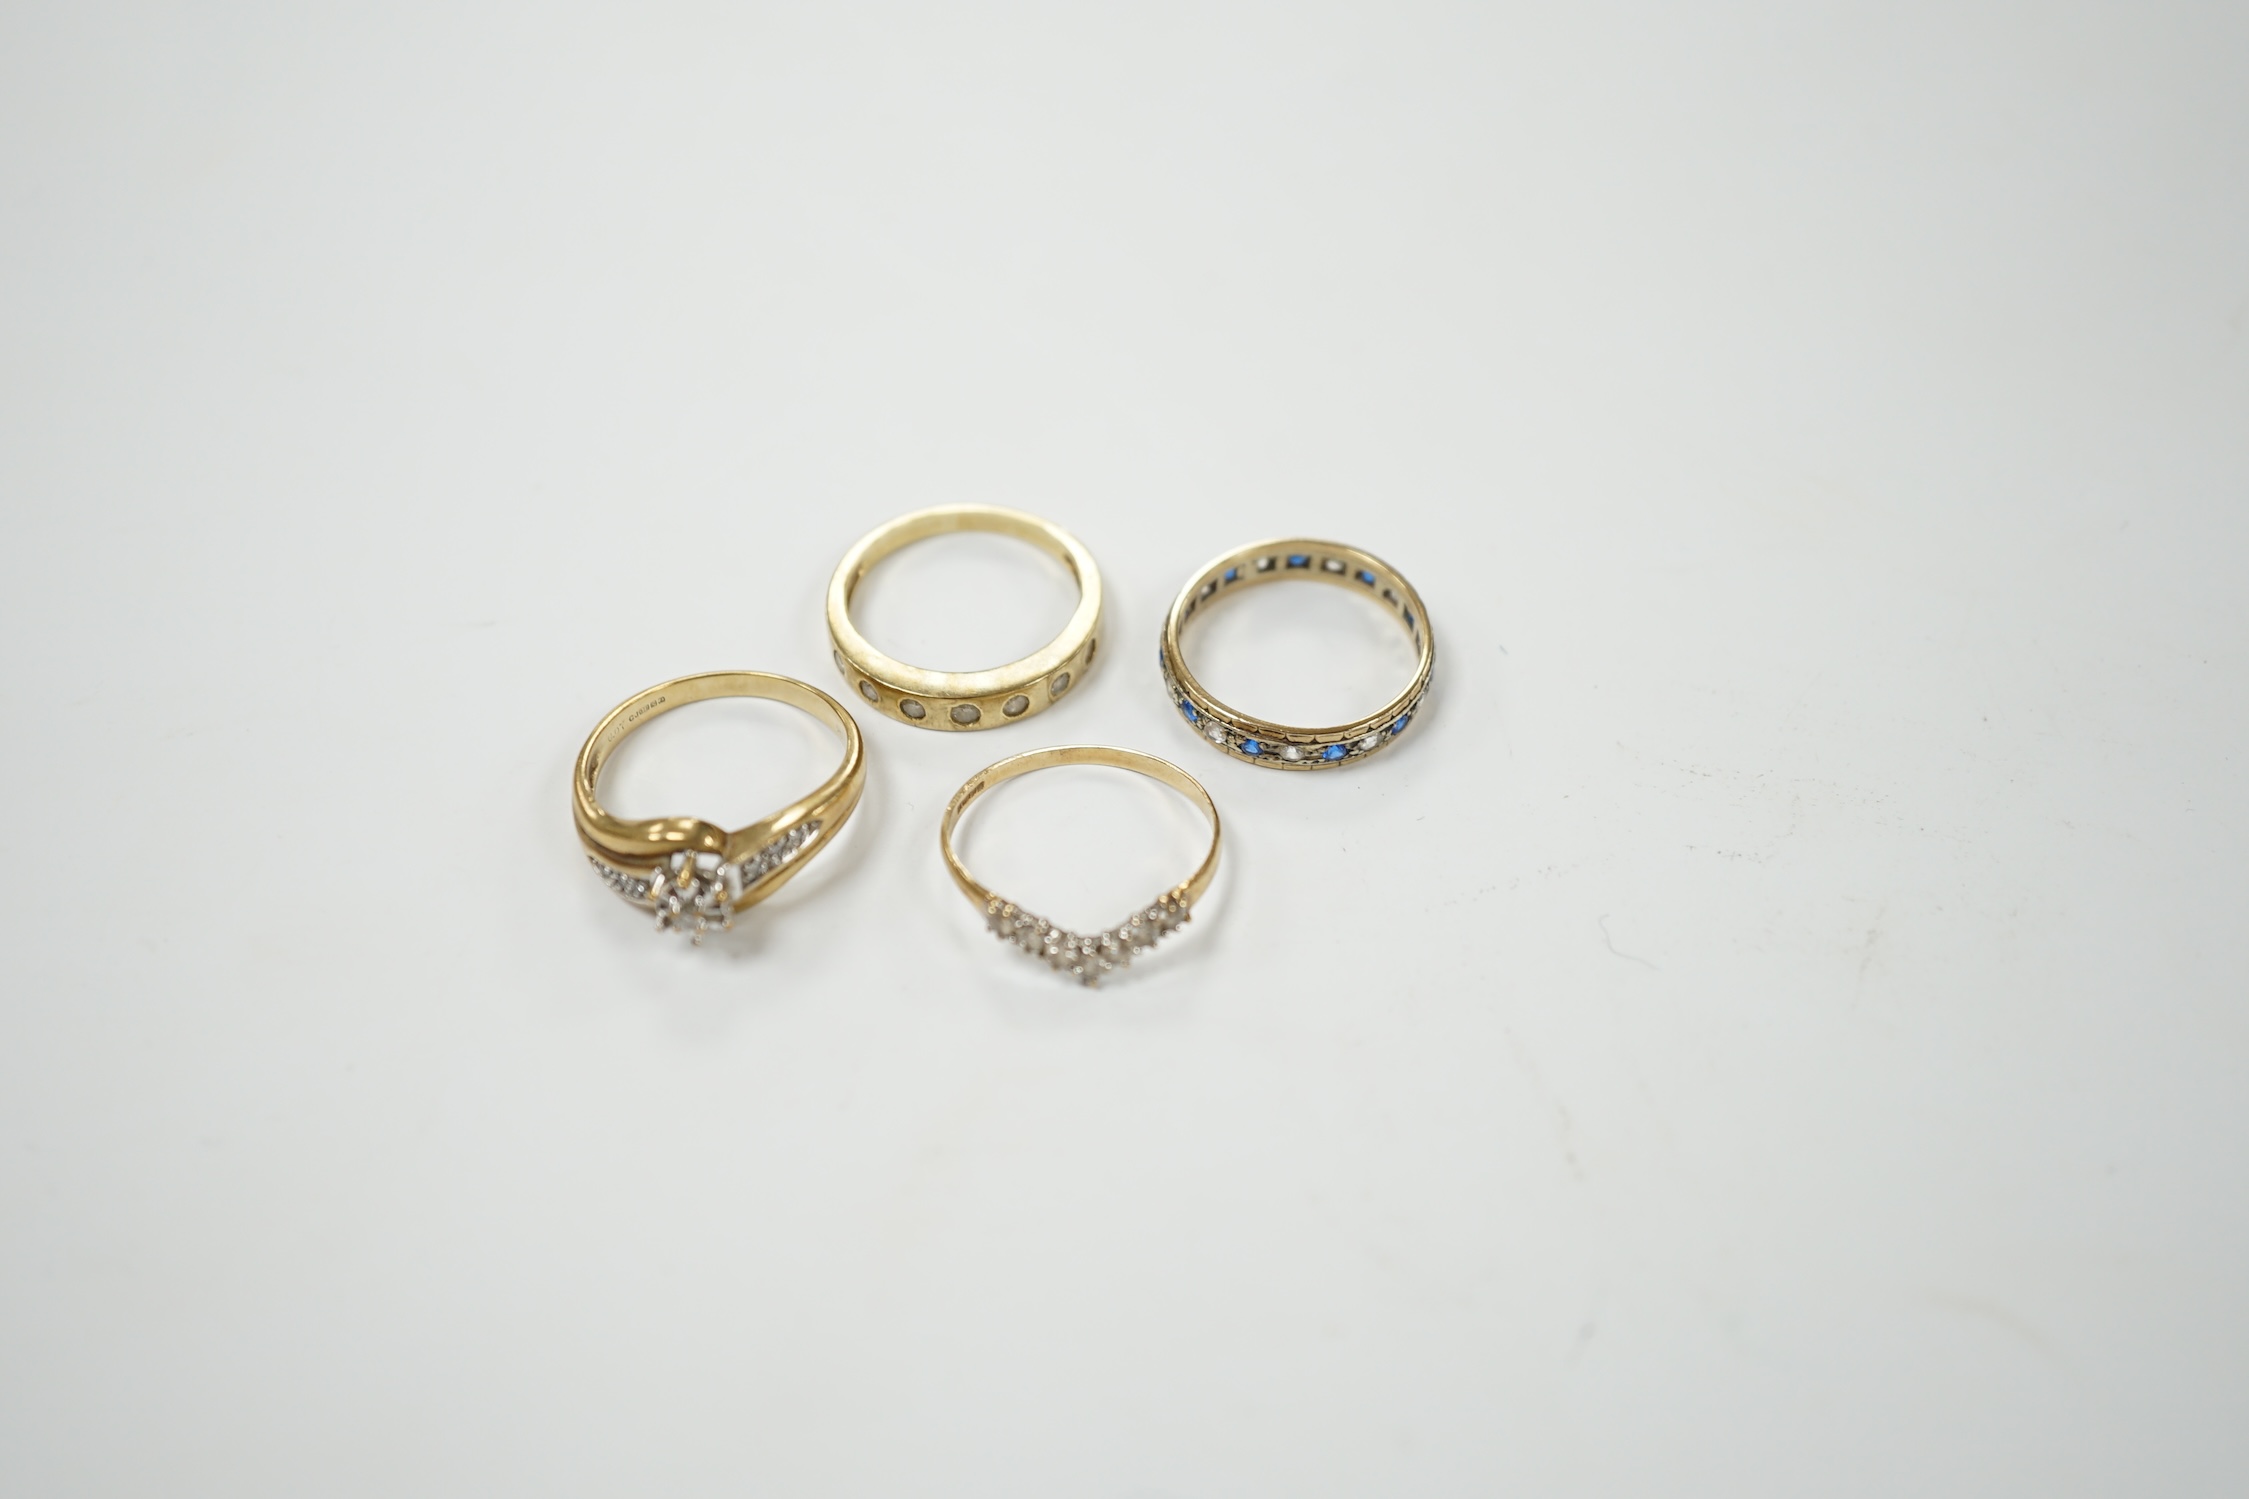 Two modern 9ct gold and diamond set rings and a 9ct gold, simulated diamond set chevron shaped ring and one other 9ct and paste set band, gross weight 9 grams. Condition - poor to fair